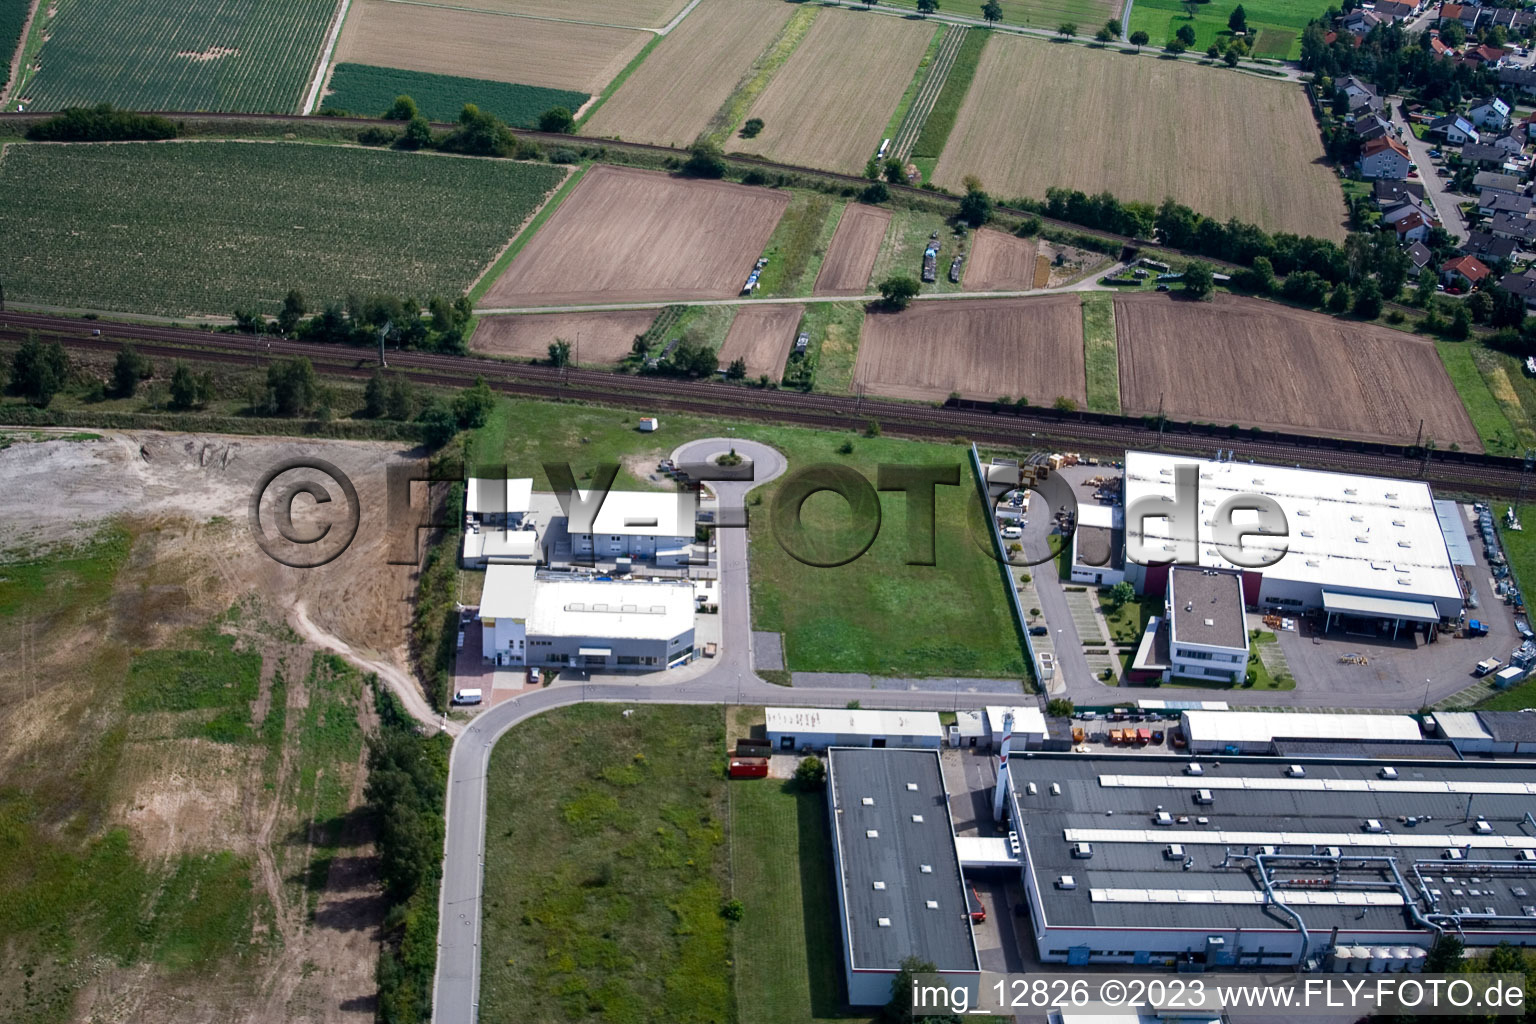 District Neudorf in Graben-Neudorf in the state Baden-Wuerttemberg, Germany seen from a drone